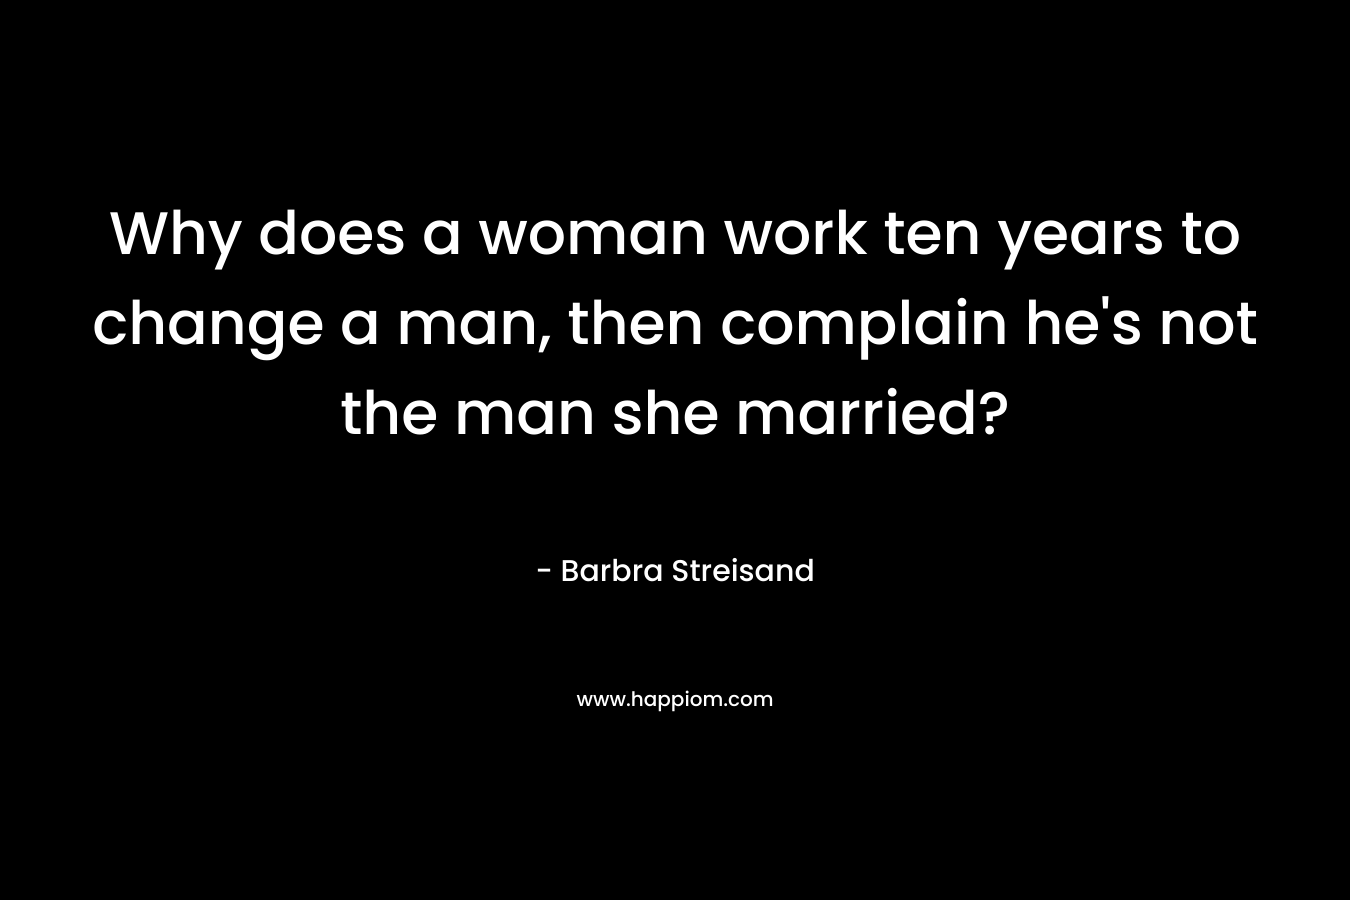 Why does a woman work ten years to change a man, then complain he's not the man she married?